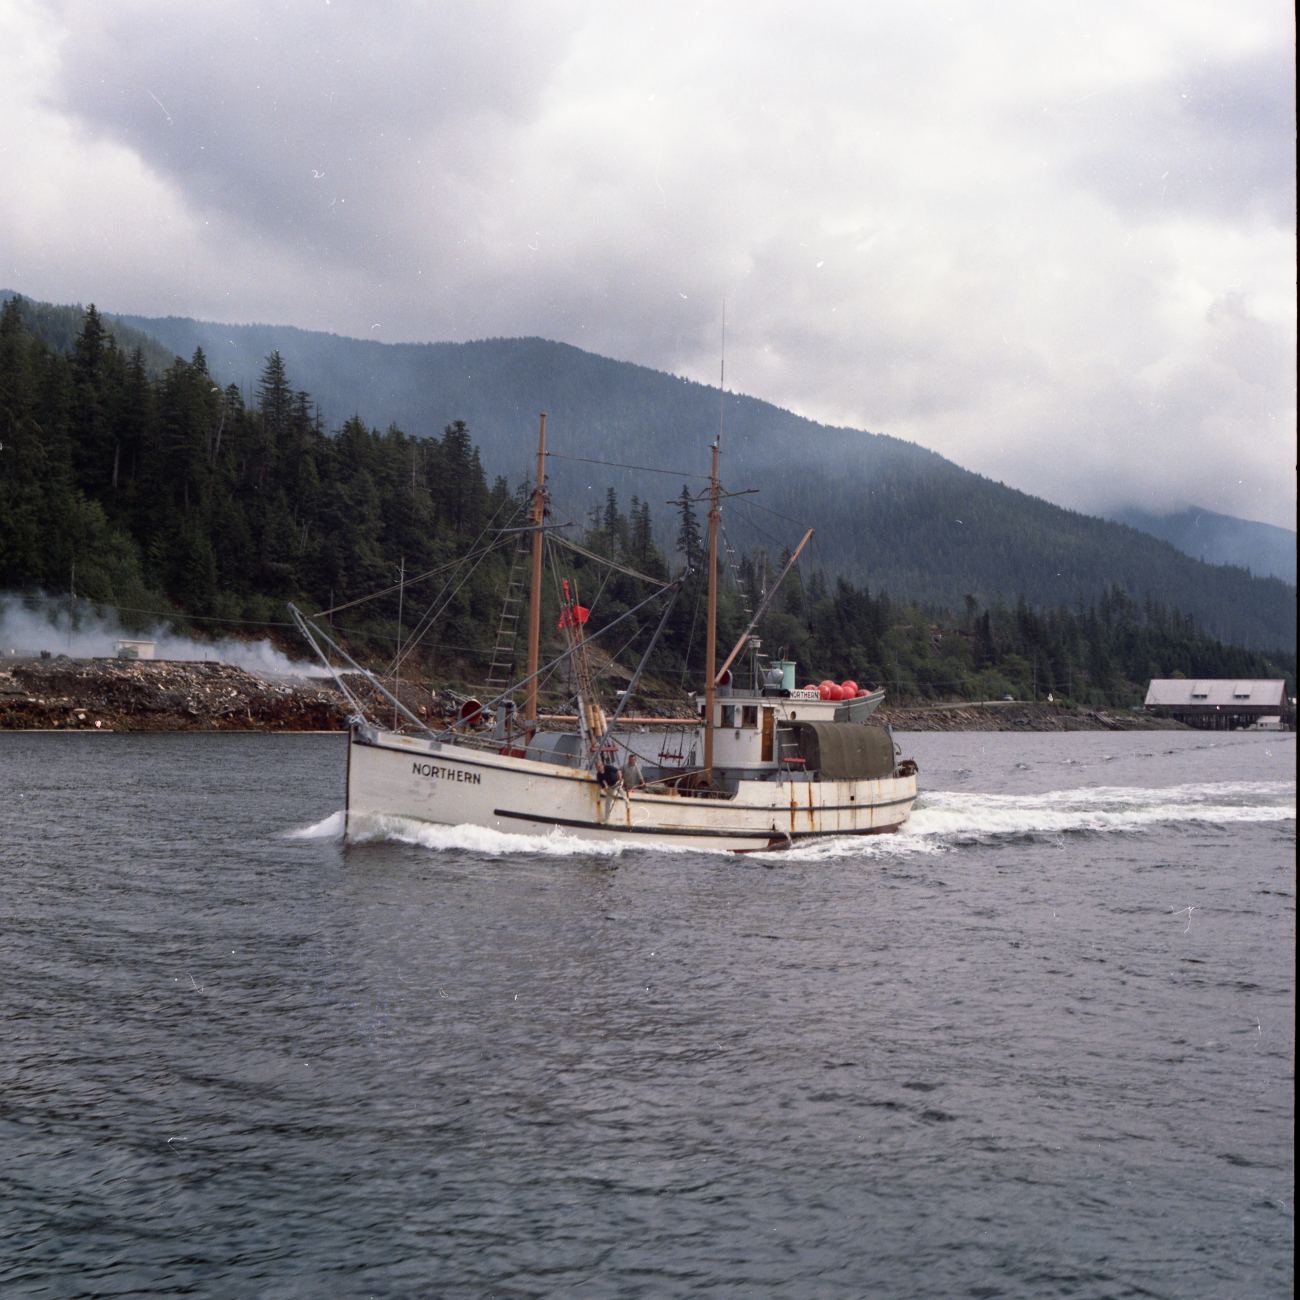 A fishing vessel seen from the USC&GS; Ship PATTON, probably nearKetchikan